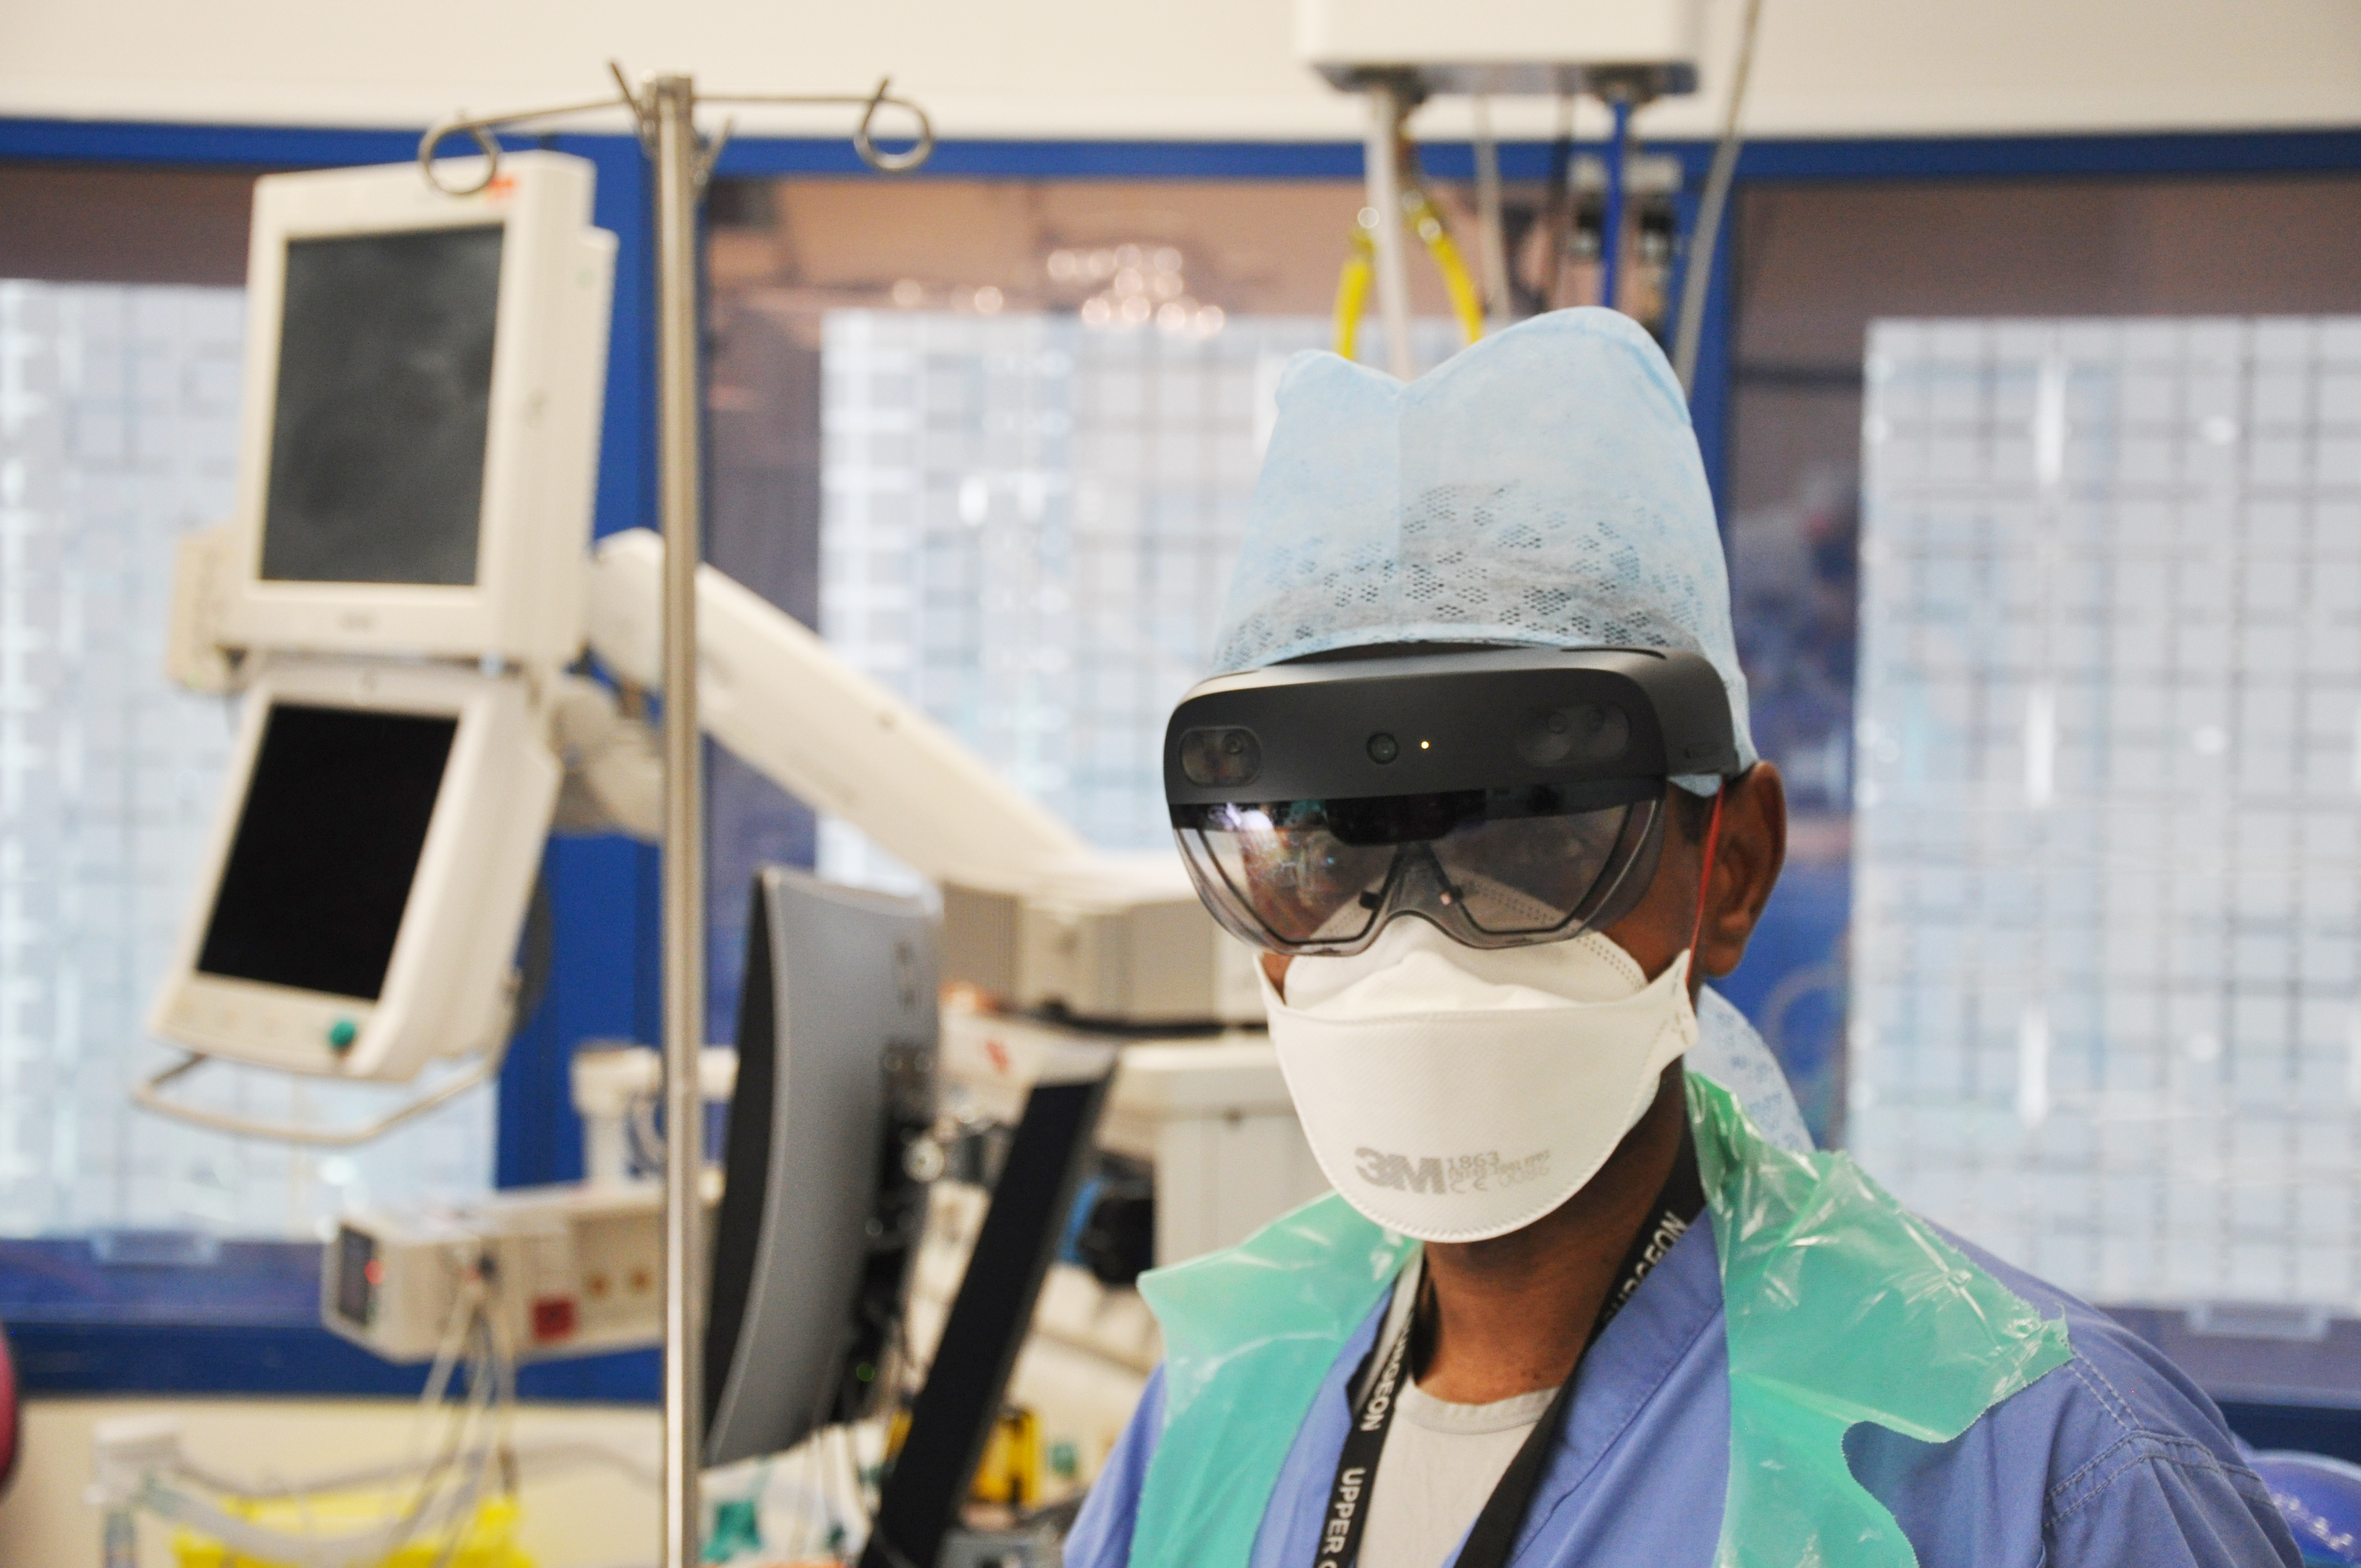 NHS surgeon prepares for surgery during the COVID-19 outbreak wearing a Microsoft HoloLens and full PPE